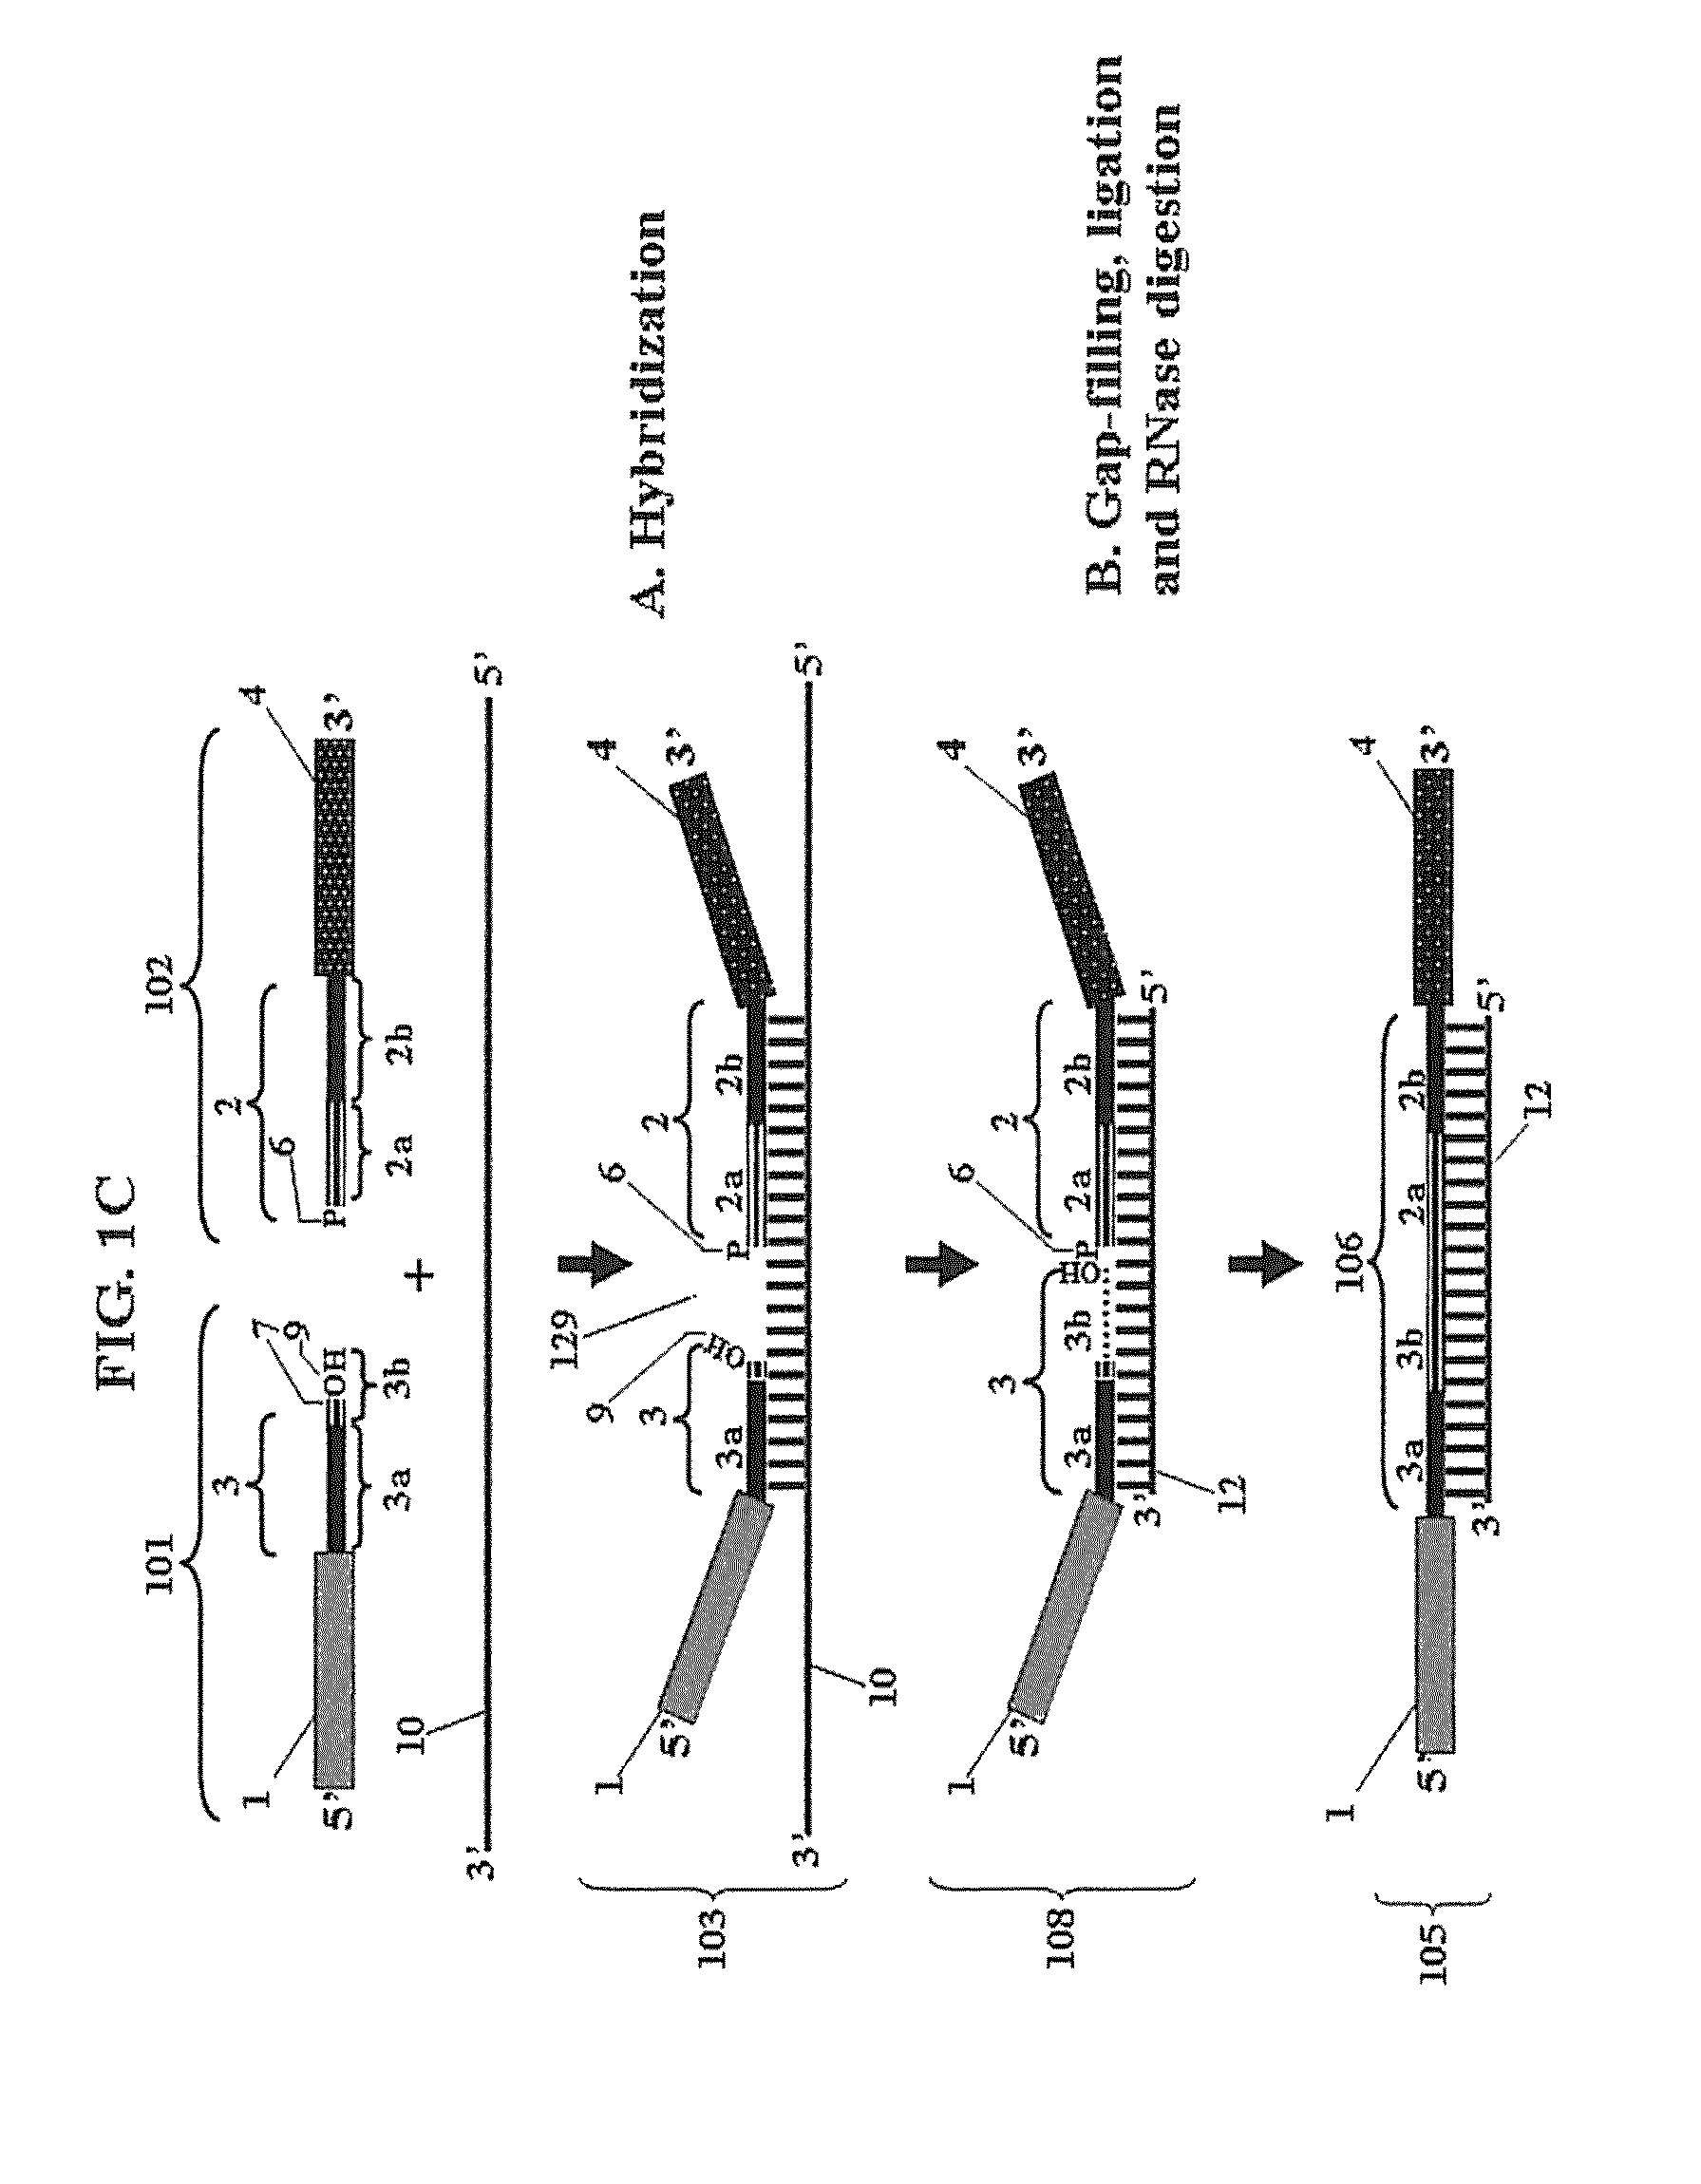 Chimeric oligonucleotides for ligation-enhanced nucleic acid detection, methods and compositions therefor